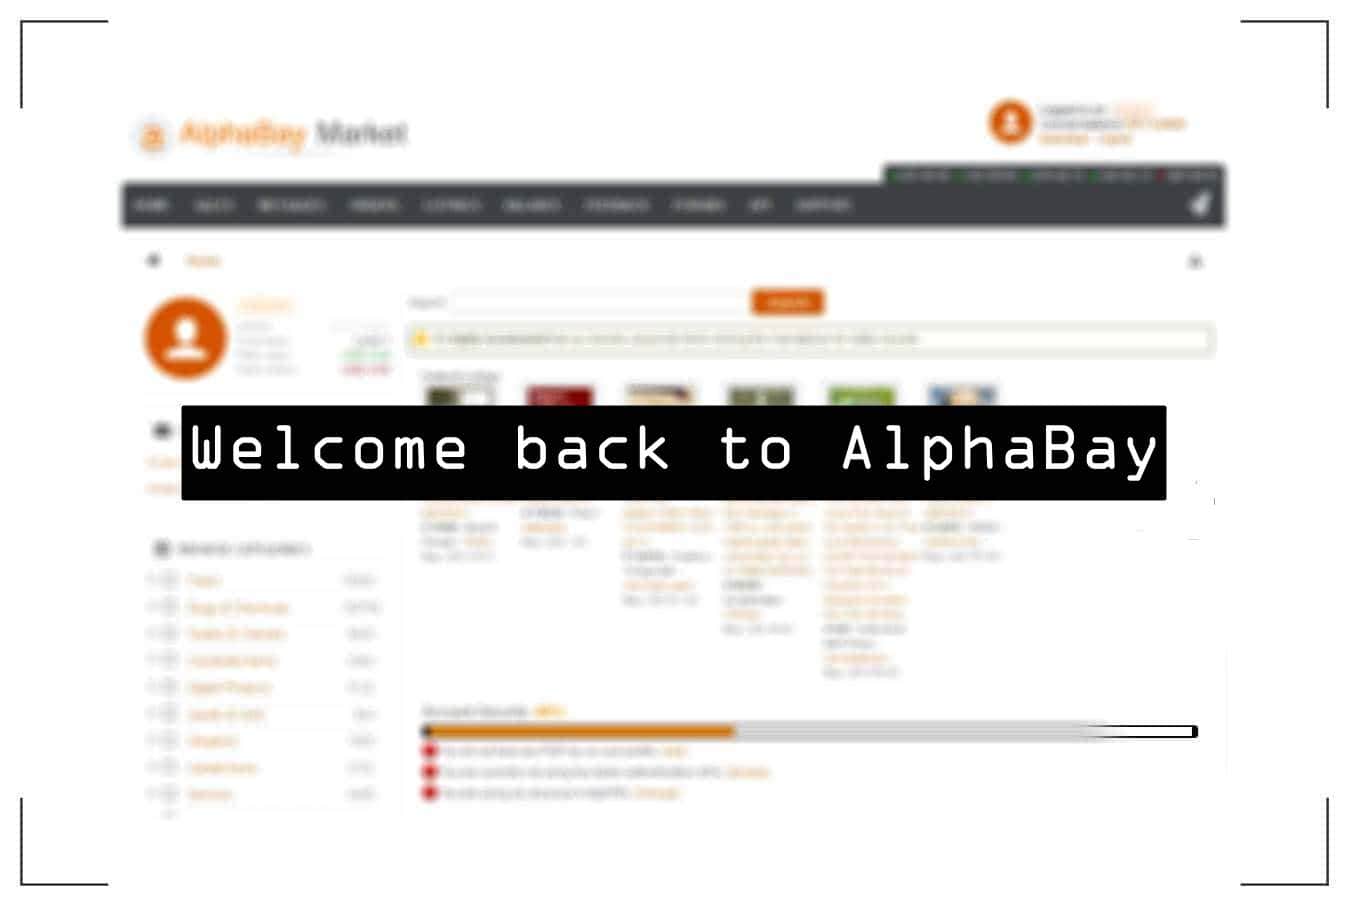 Dark web AlphaBay marketplace resurface after four years